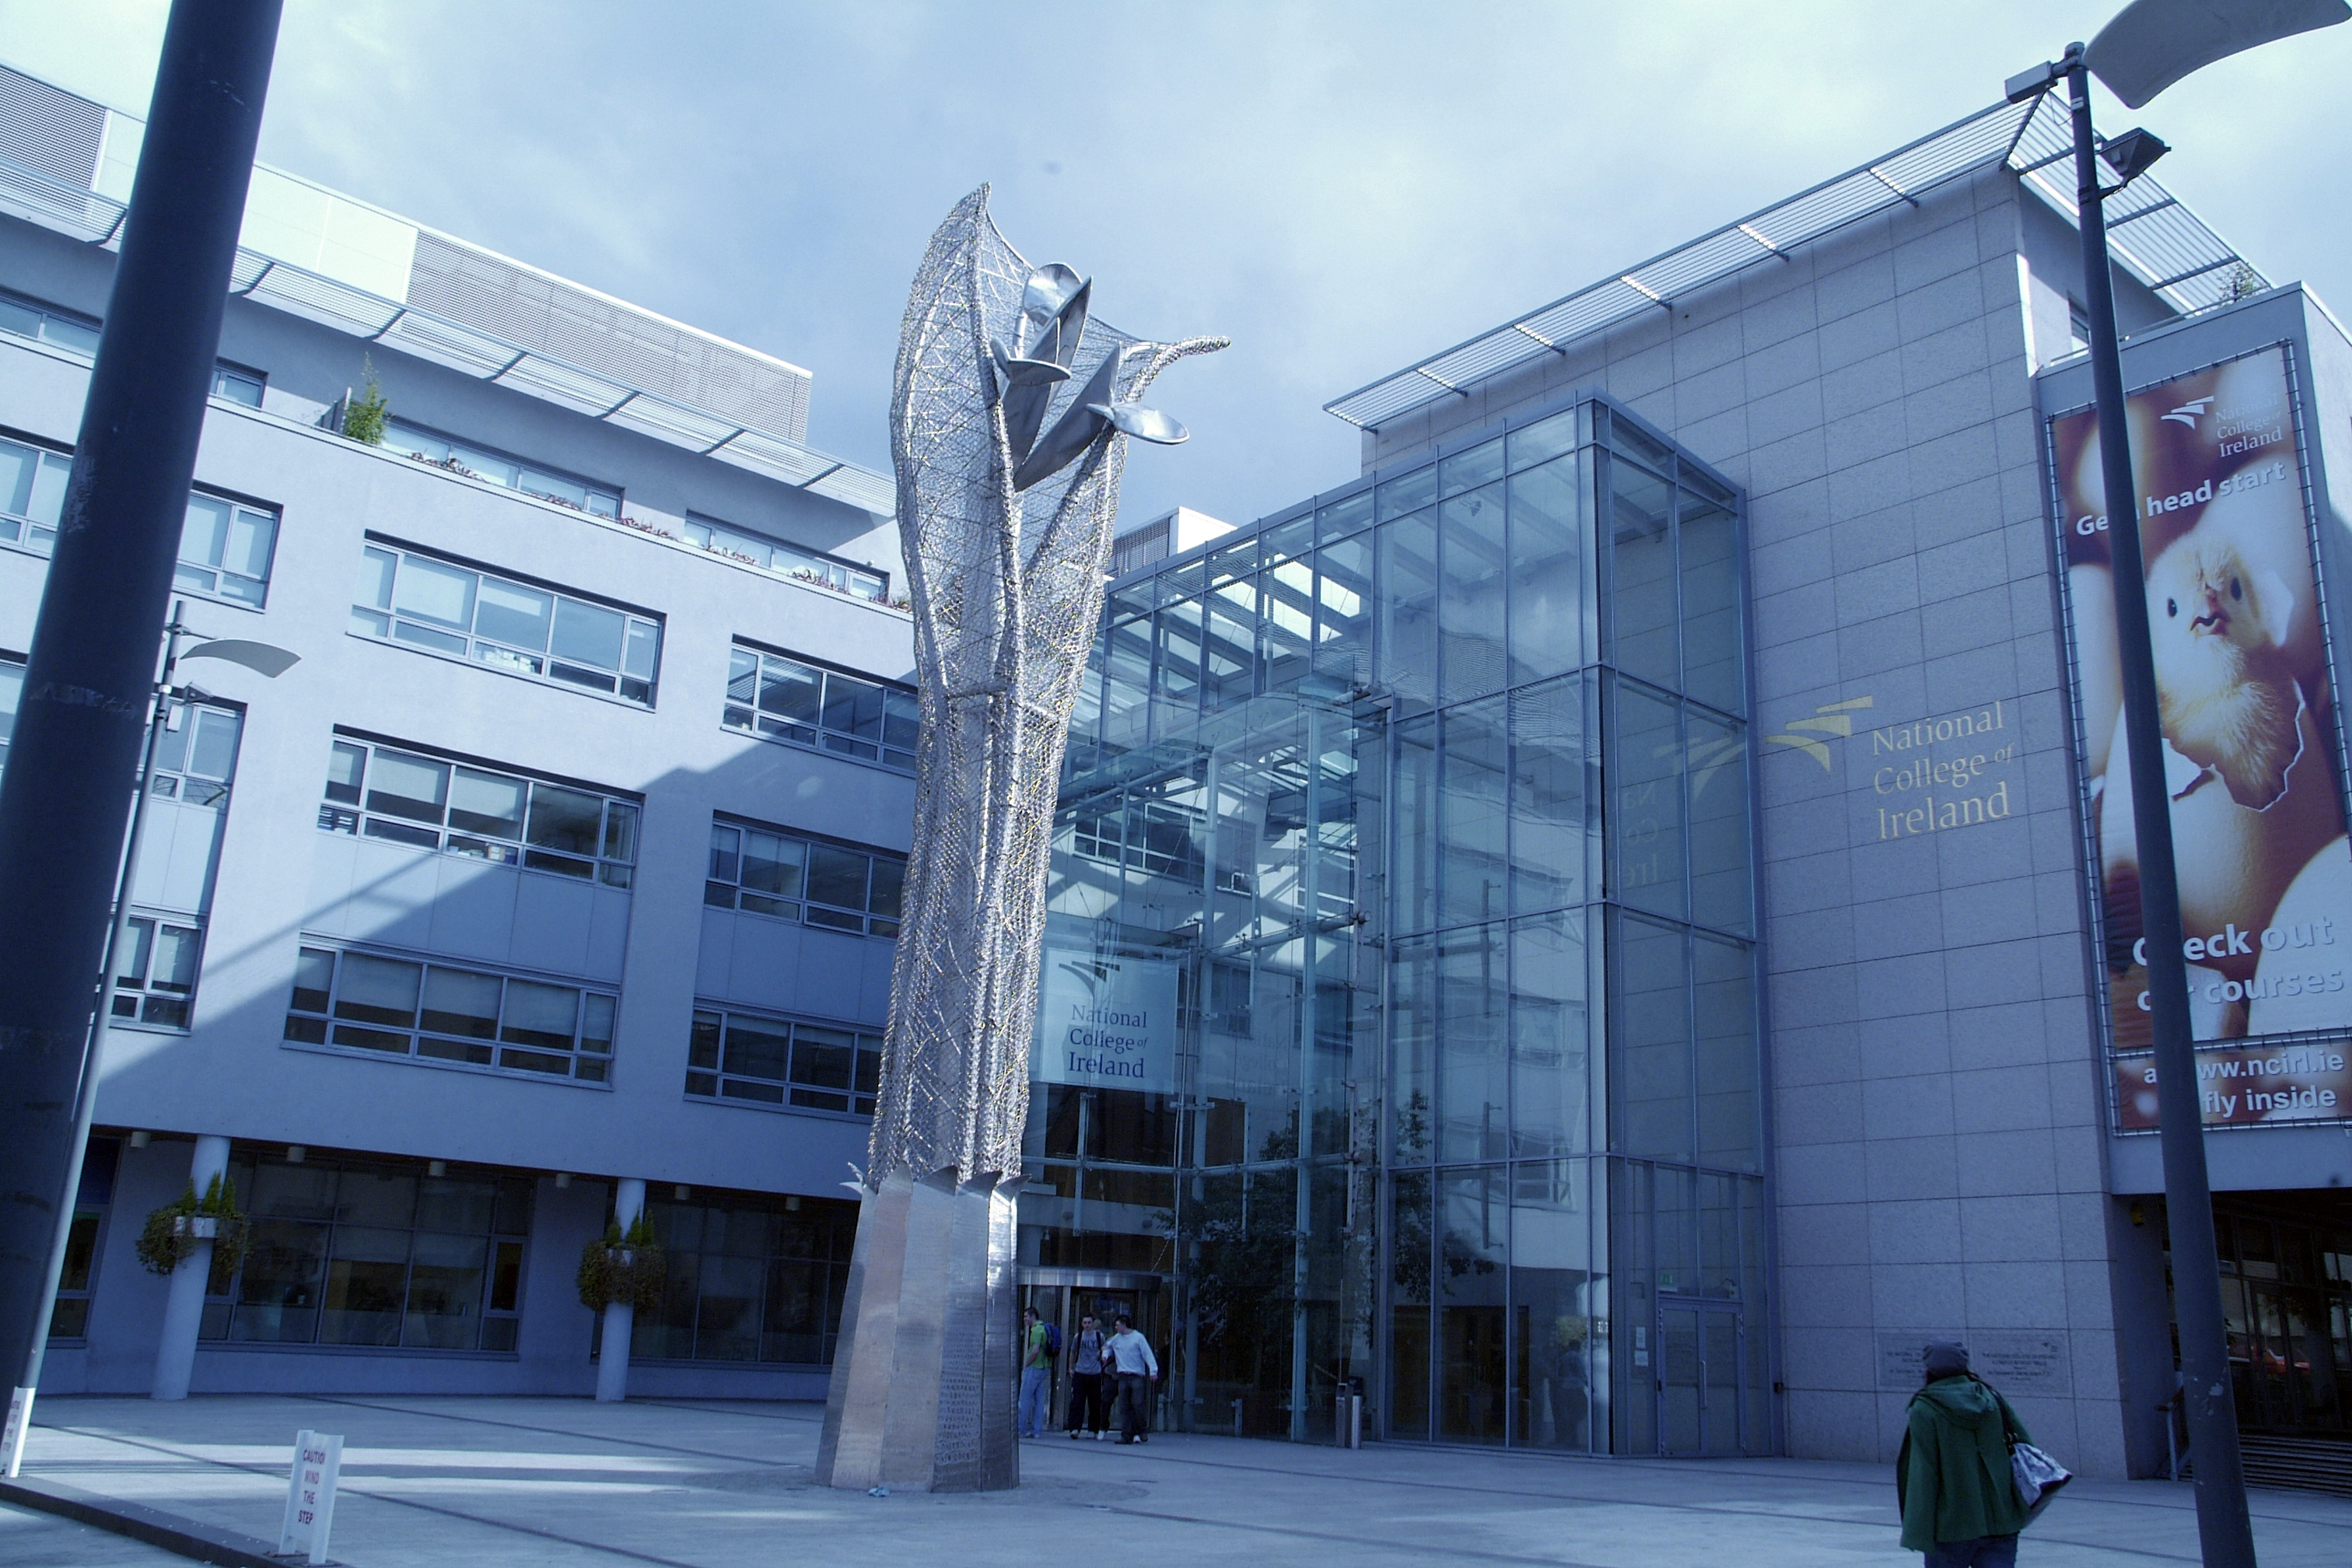 Photo of the entrance of NCI in the I.F.S.C, Dublin.